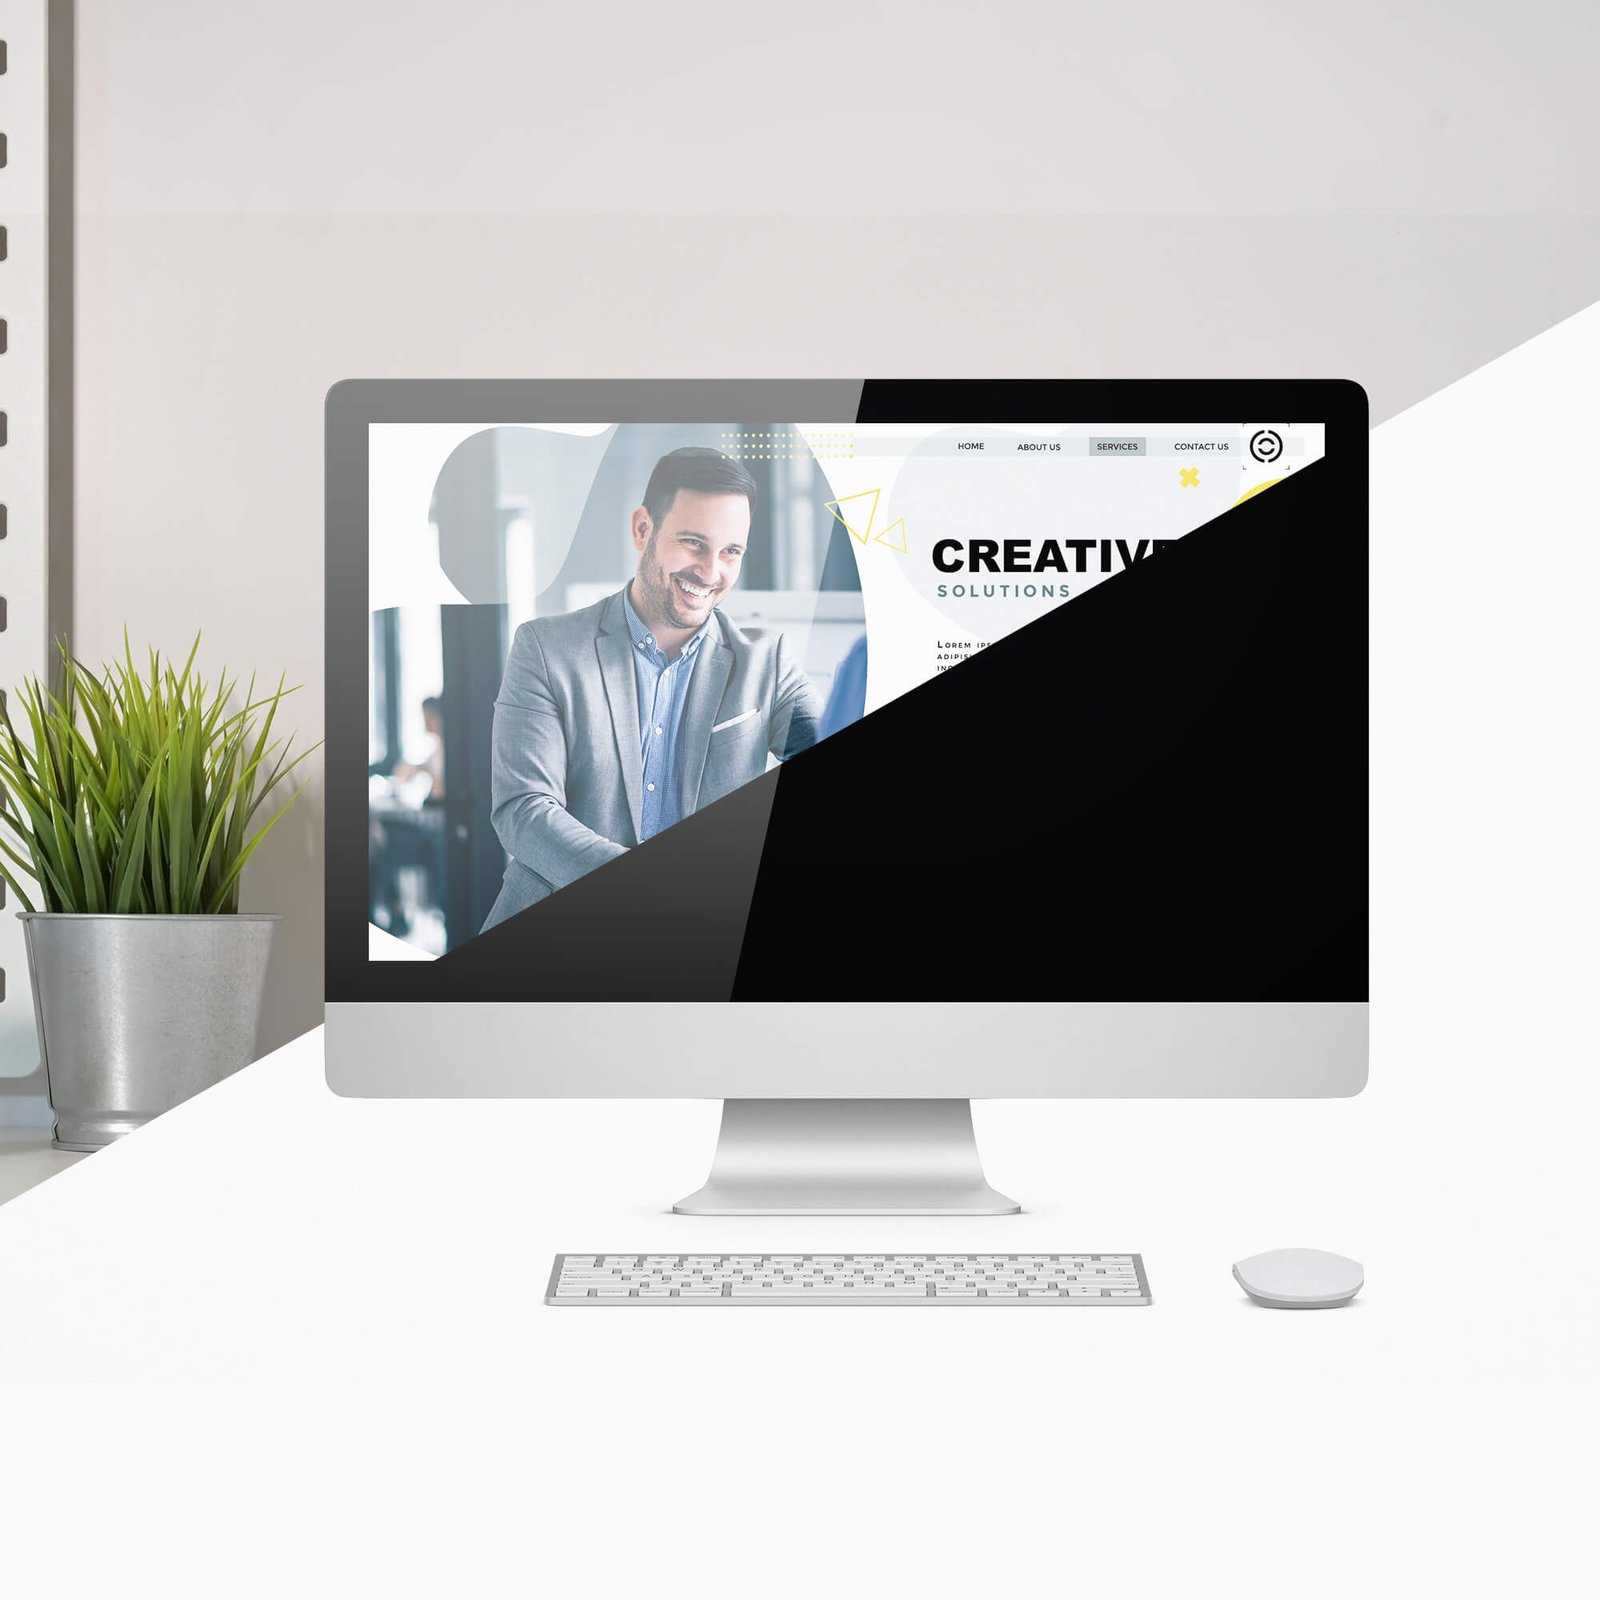 Download 20+ Realistic Website Showcase Mockup PSD Templates